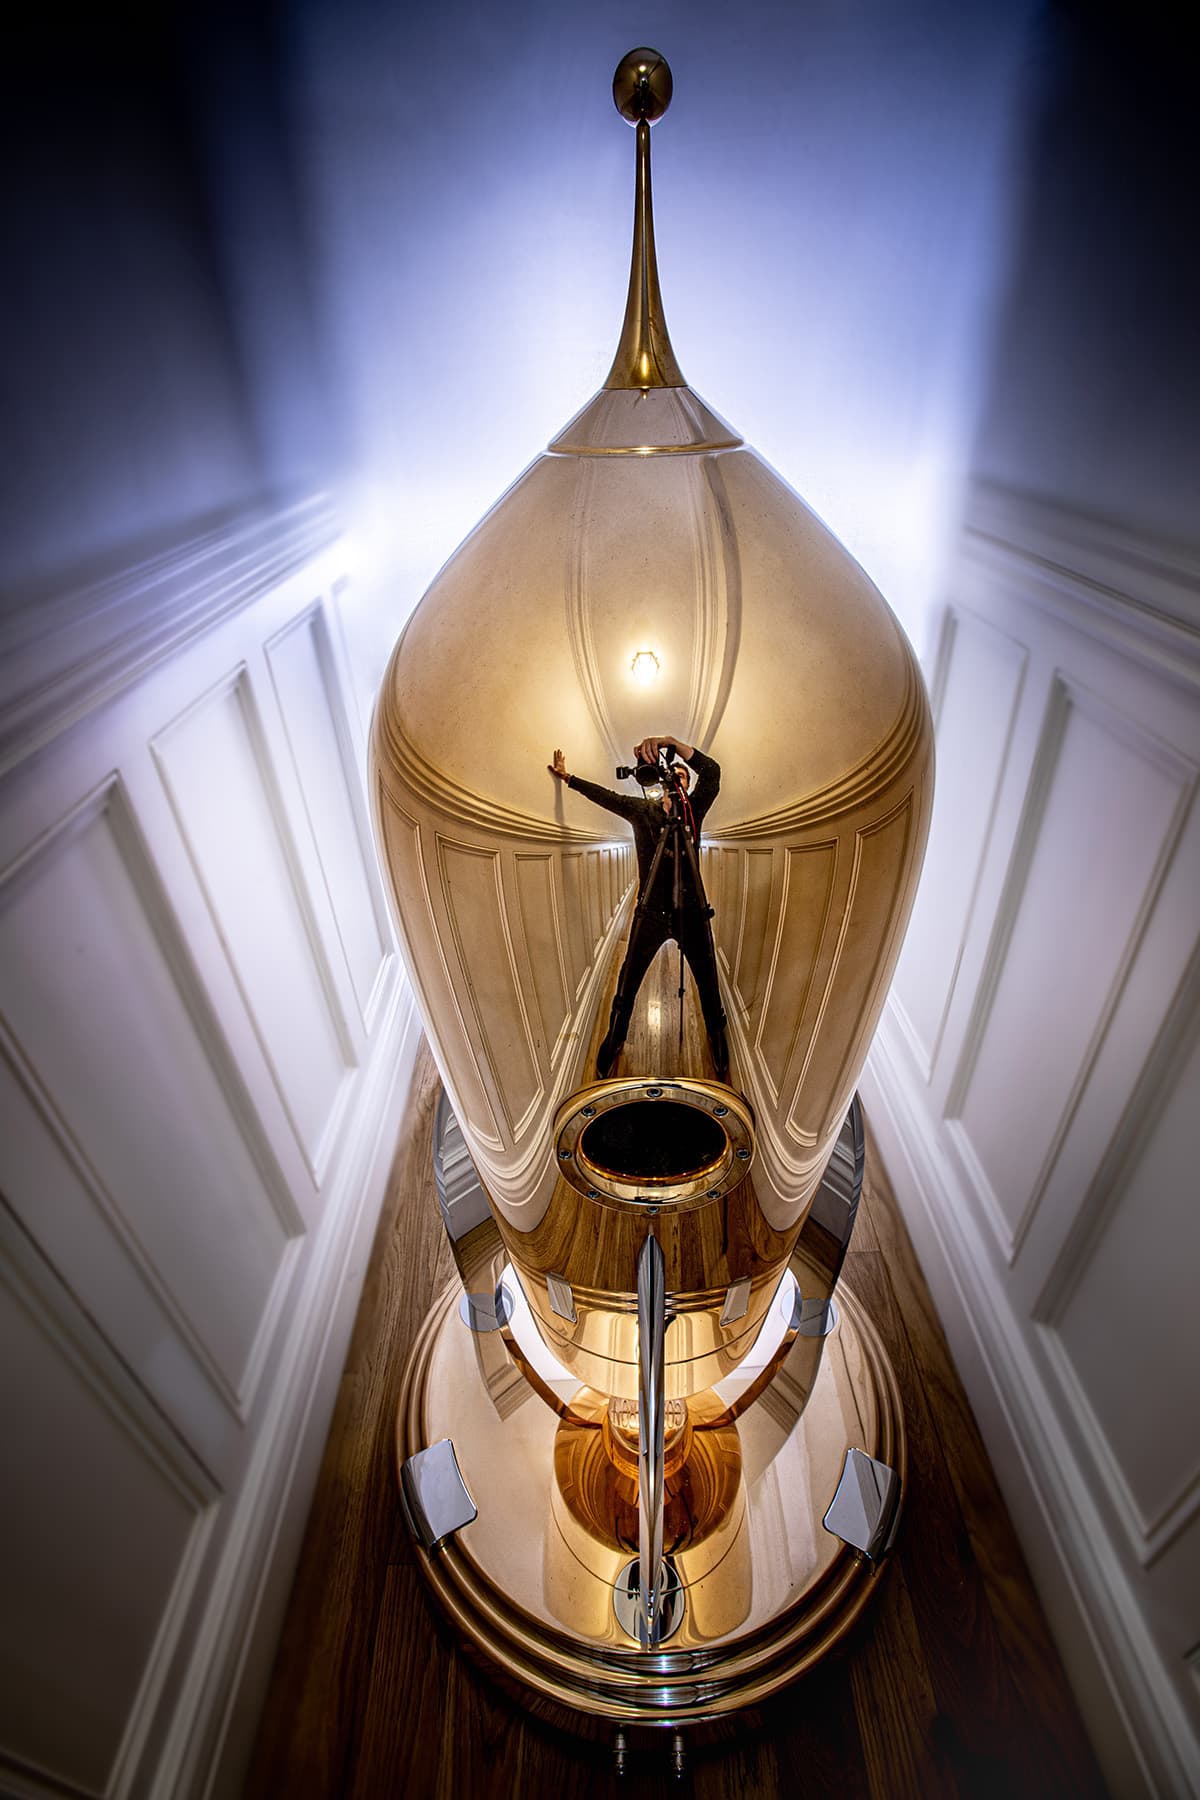 The image of photographer Julian Kronfli reflected in a highly polished bronze Cosmotron 130.